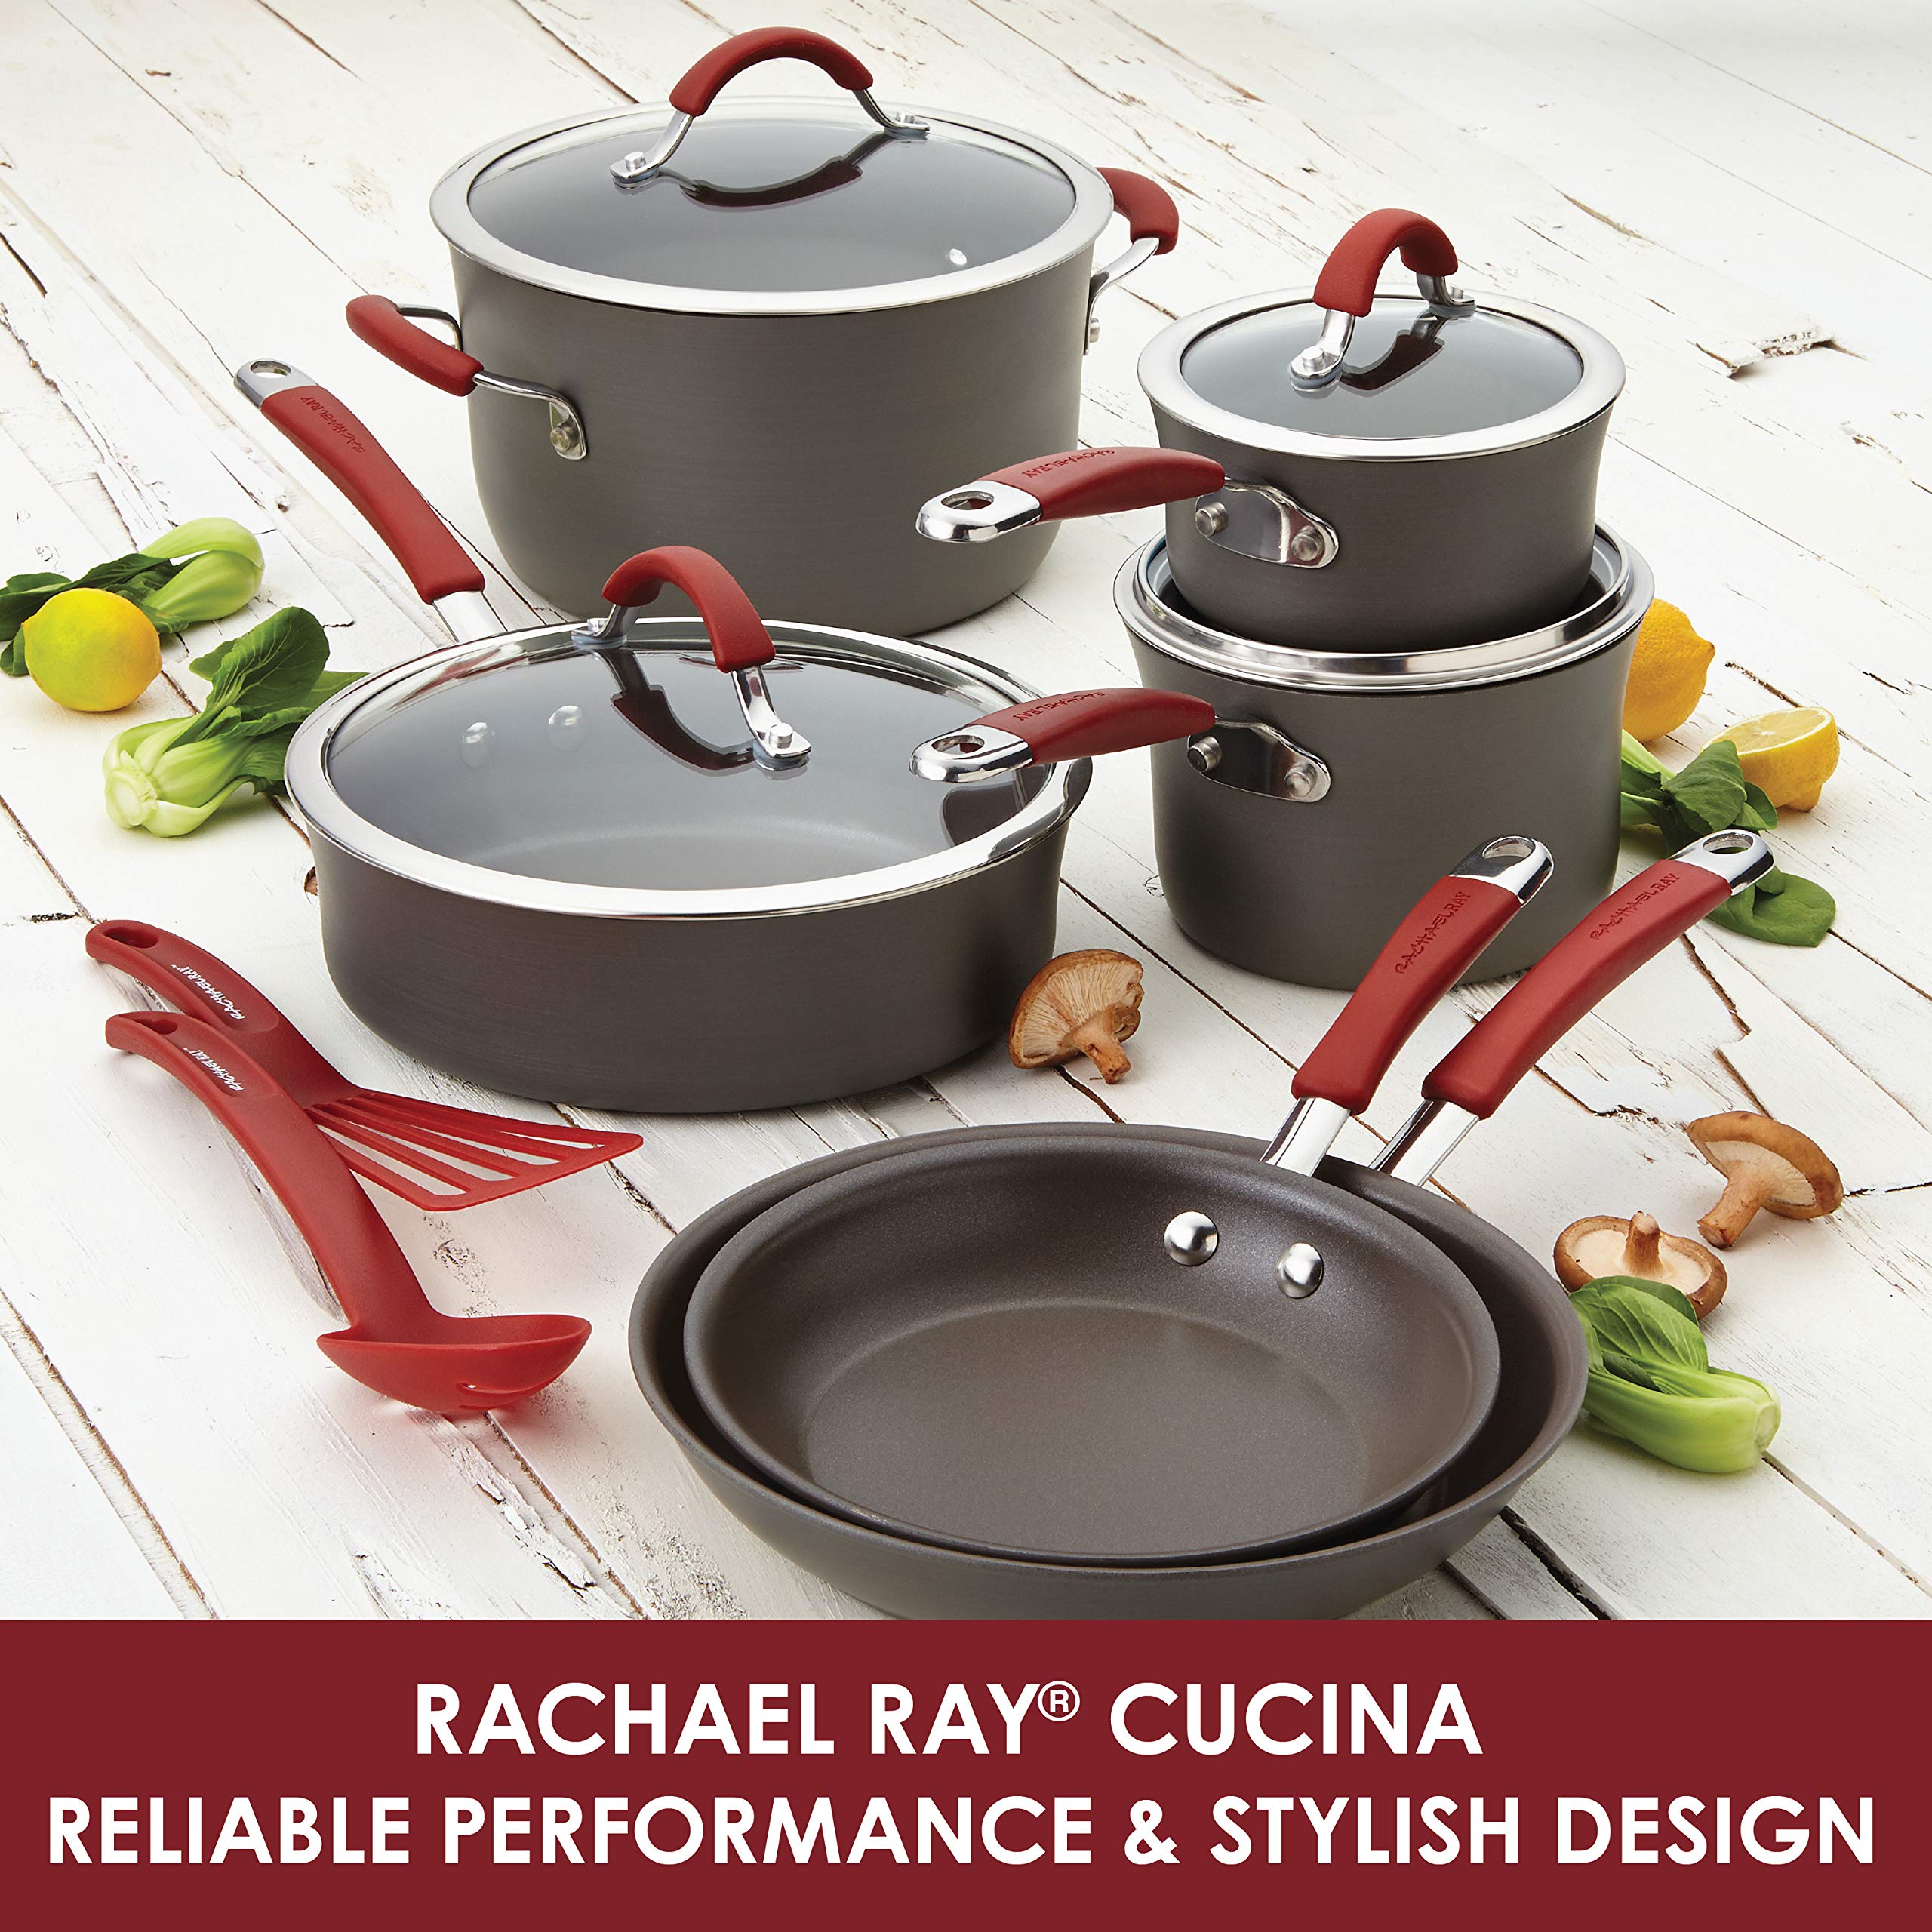 Rachael Ray - 87630 Rachael Ray Cucina Hard Anodized Nonstick Cookware Pots and Pans Set, 12 Piece, Gray with Red Handles